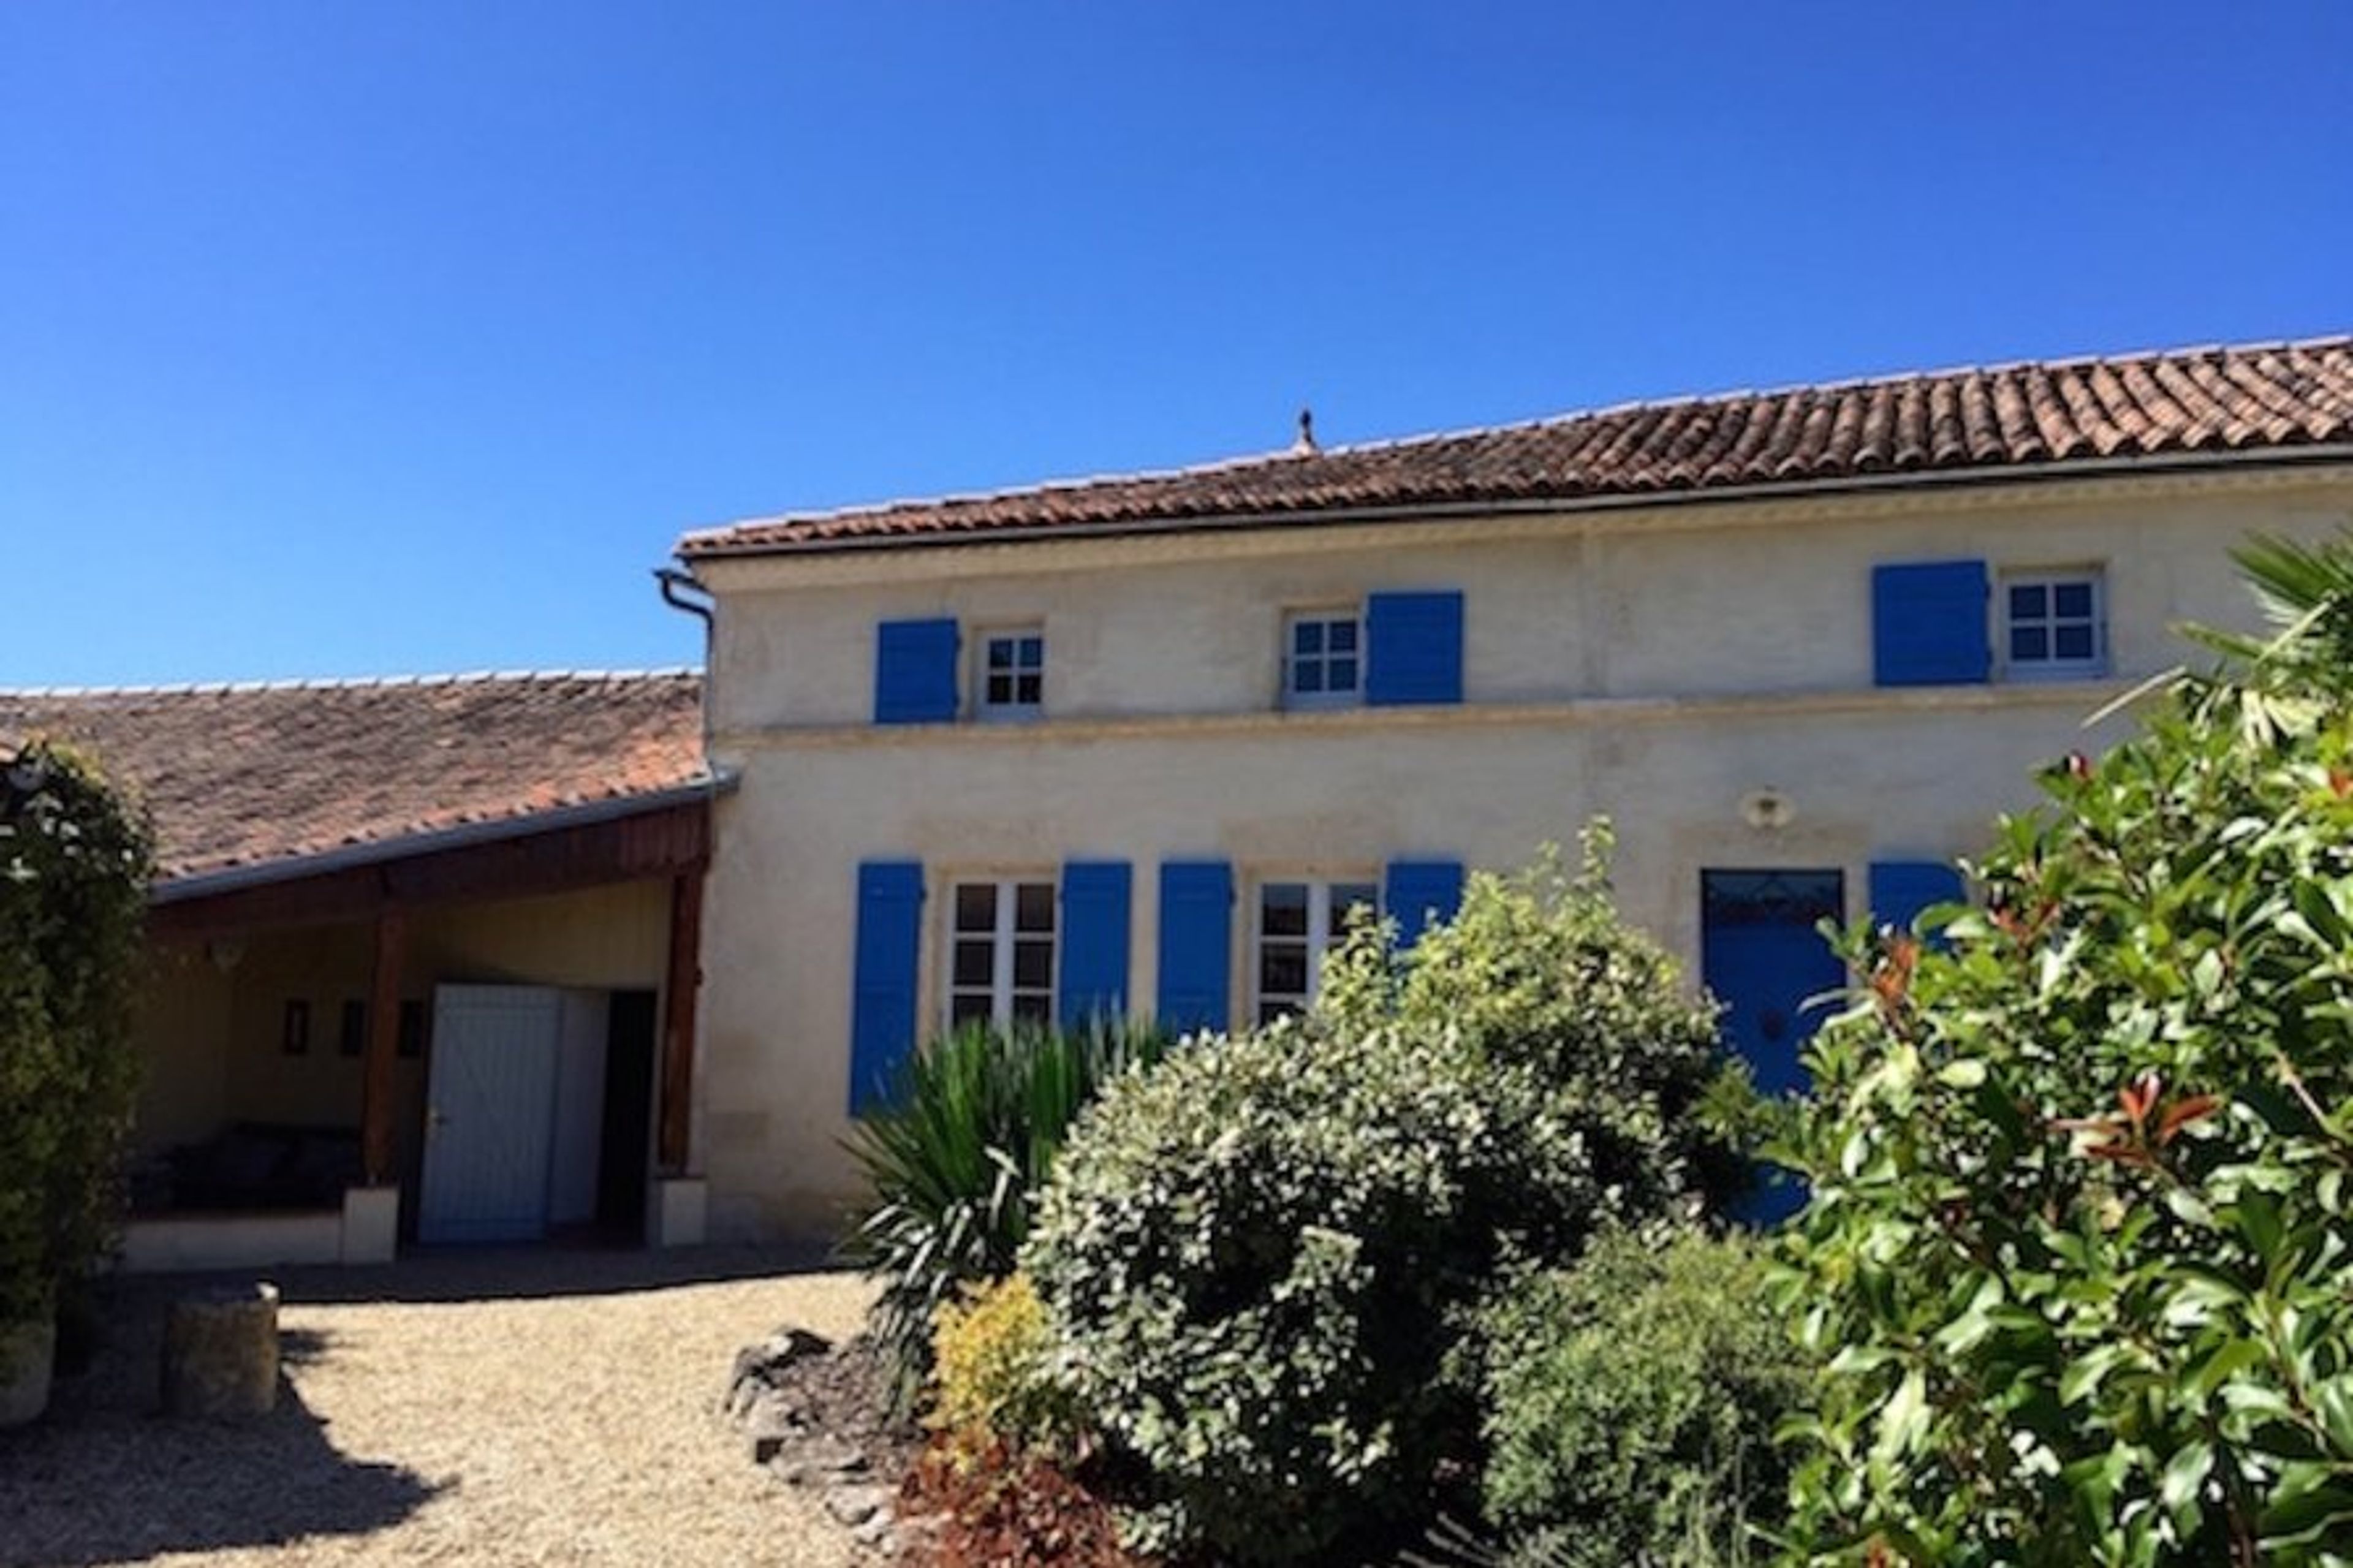 The house is built from buttery Charente stone with blue shutters.